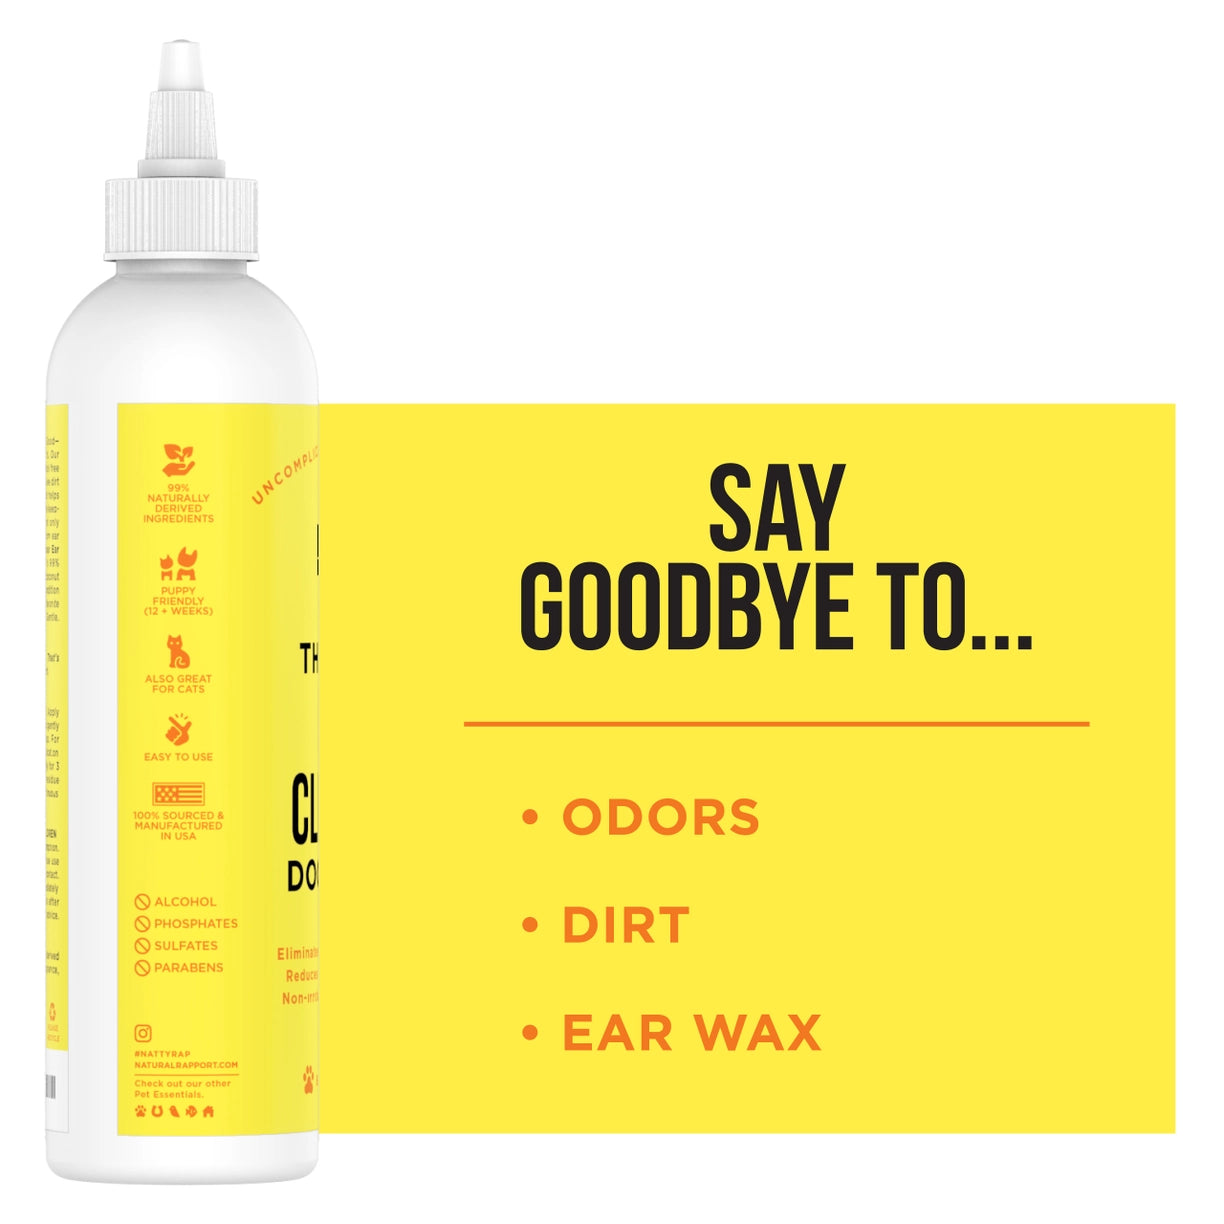 The Only Ear Cleaner- 8oz